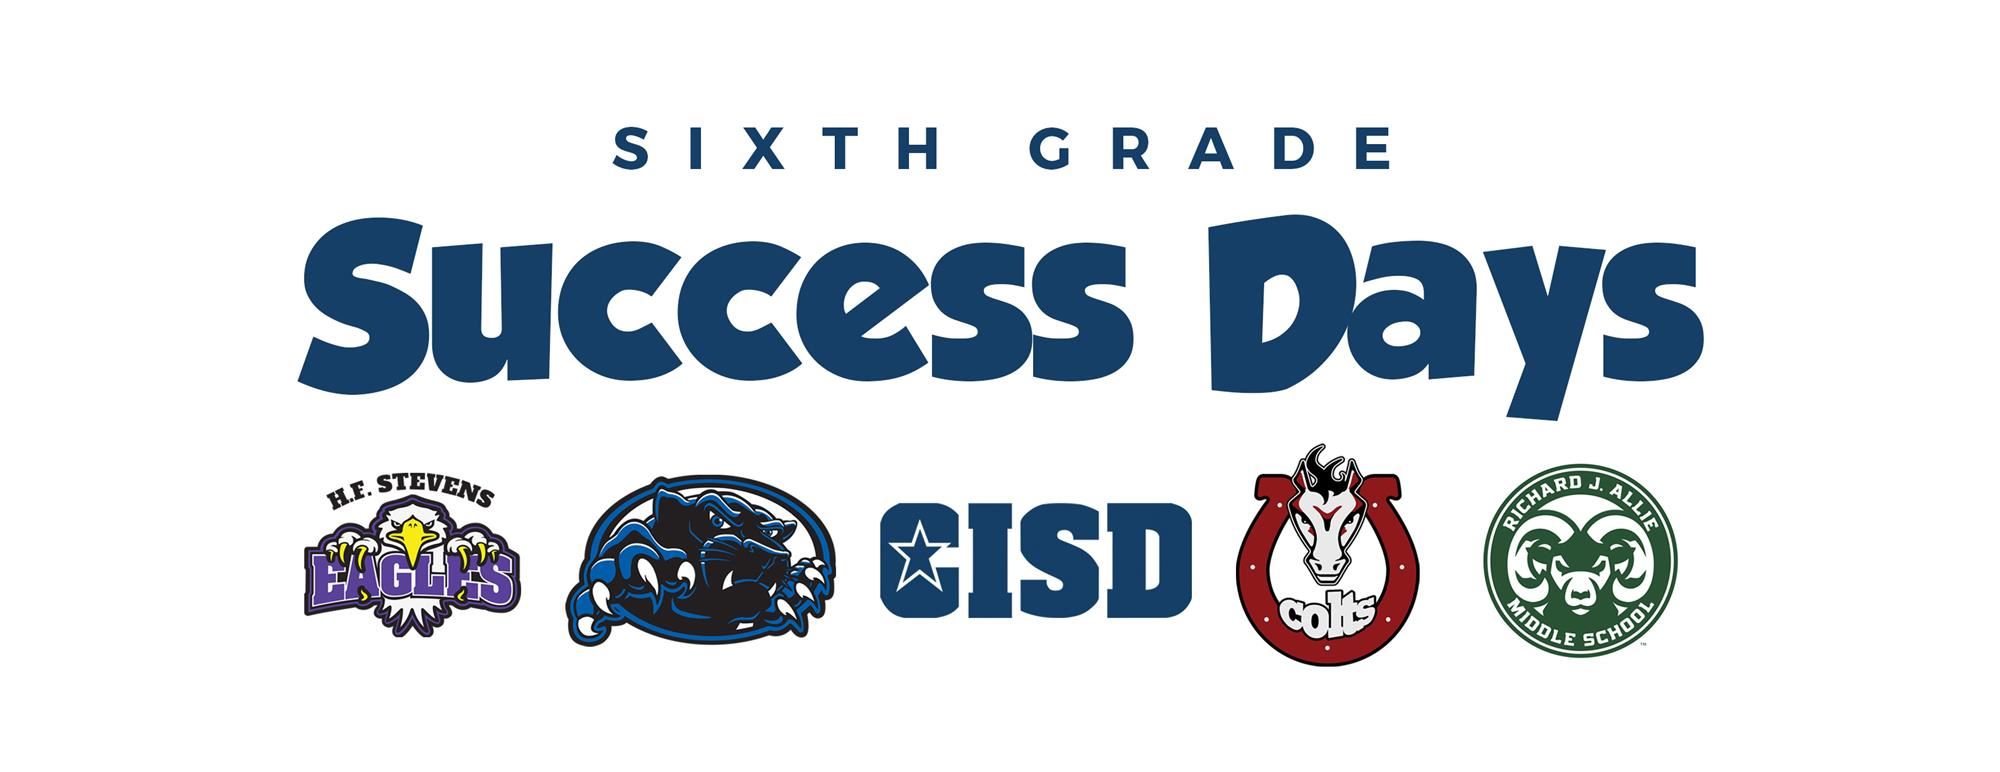 Sixth Grade Success Days with middle school logos